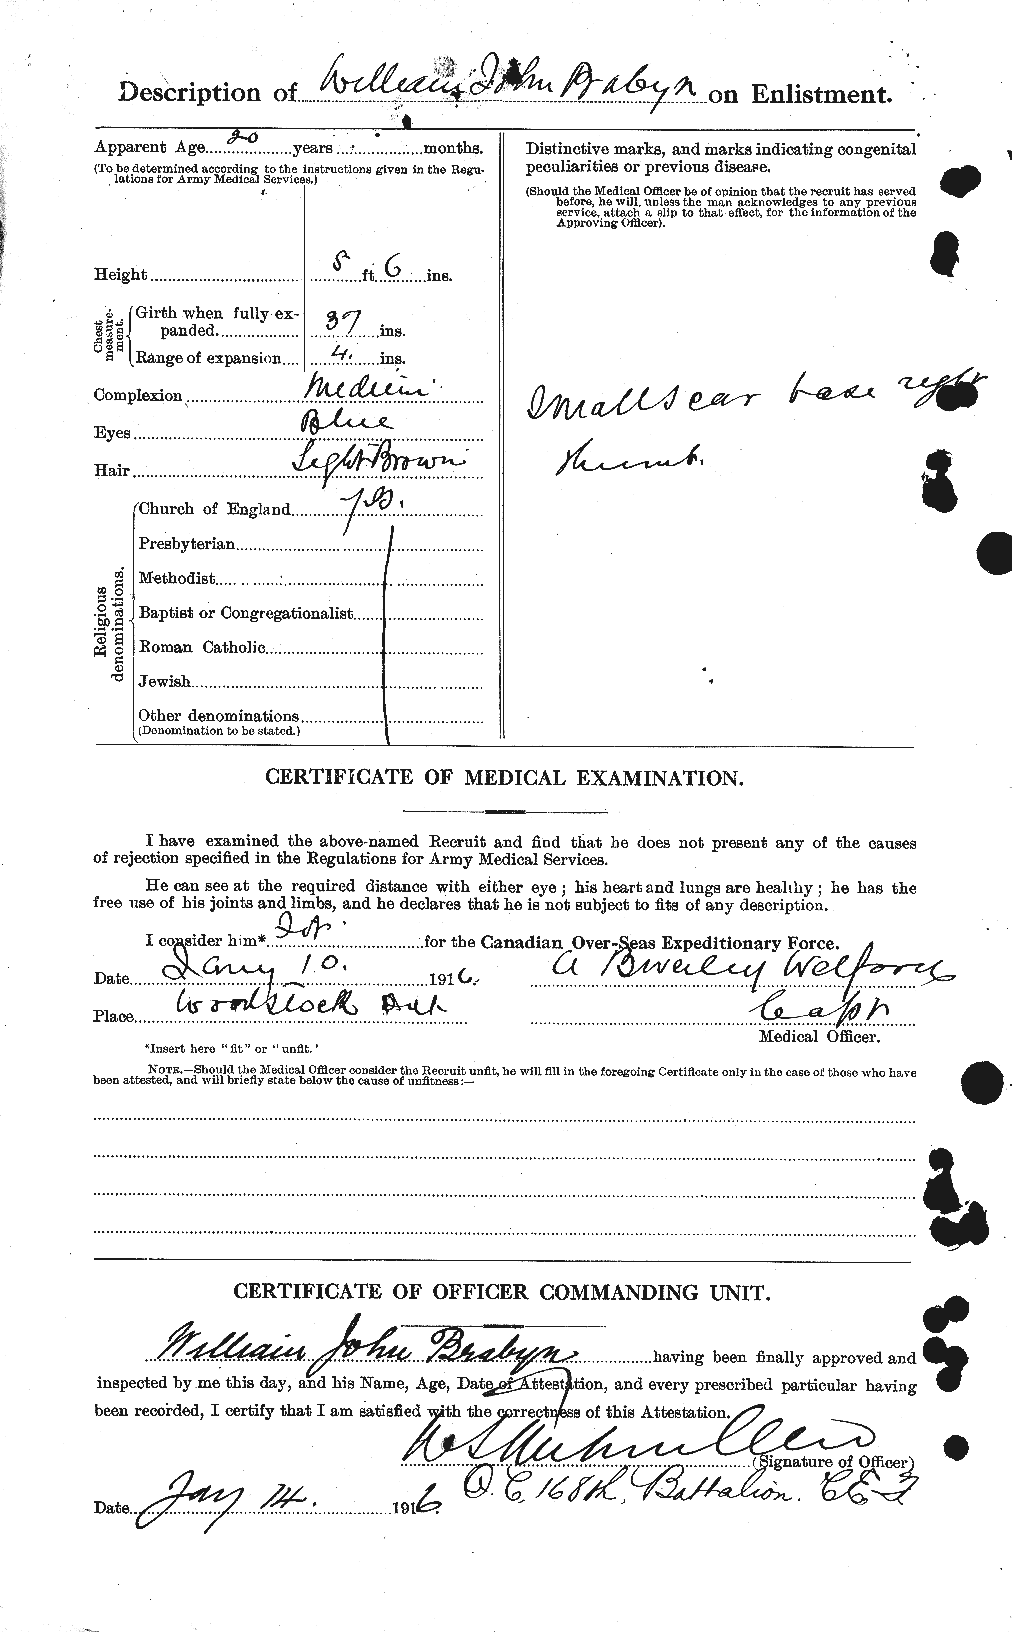 Personnel Records of the First World War - CEF 254639b